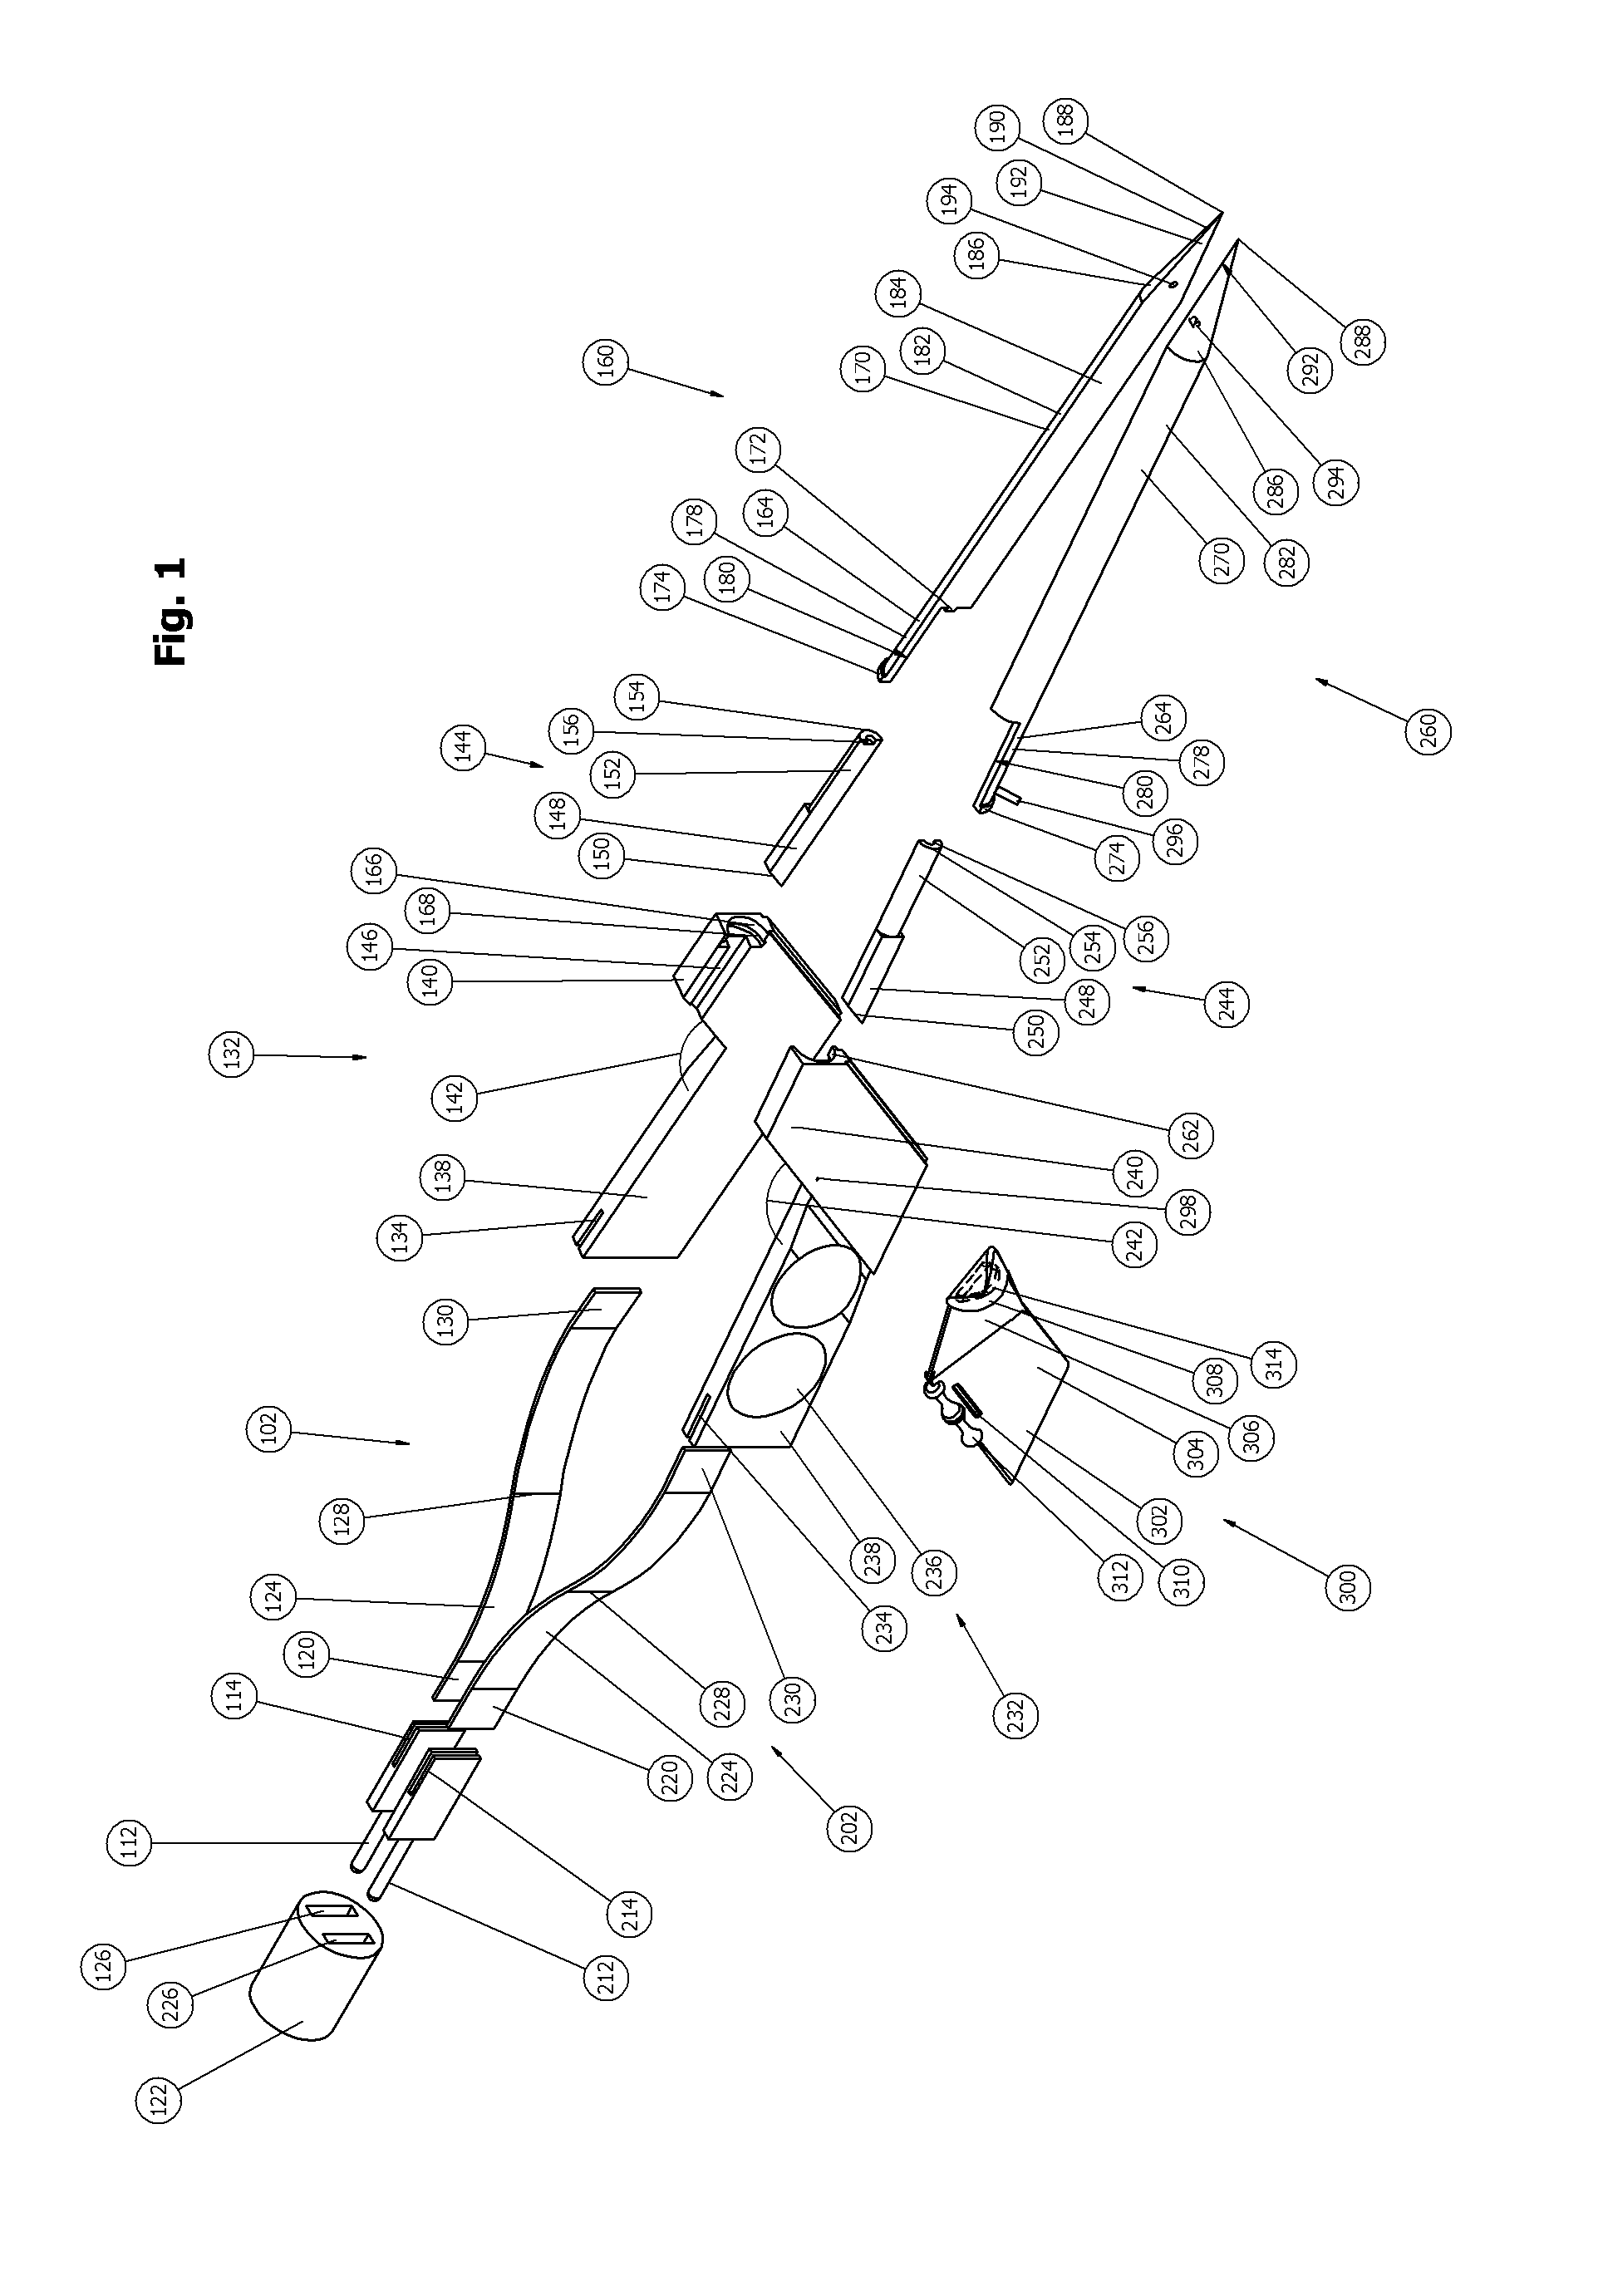 Surgical multi-tool and method of use